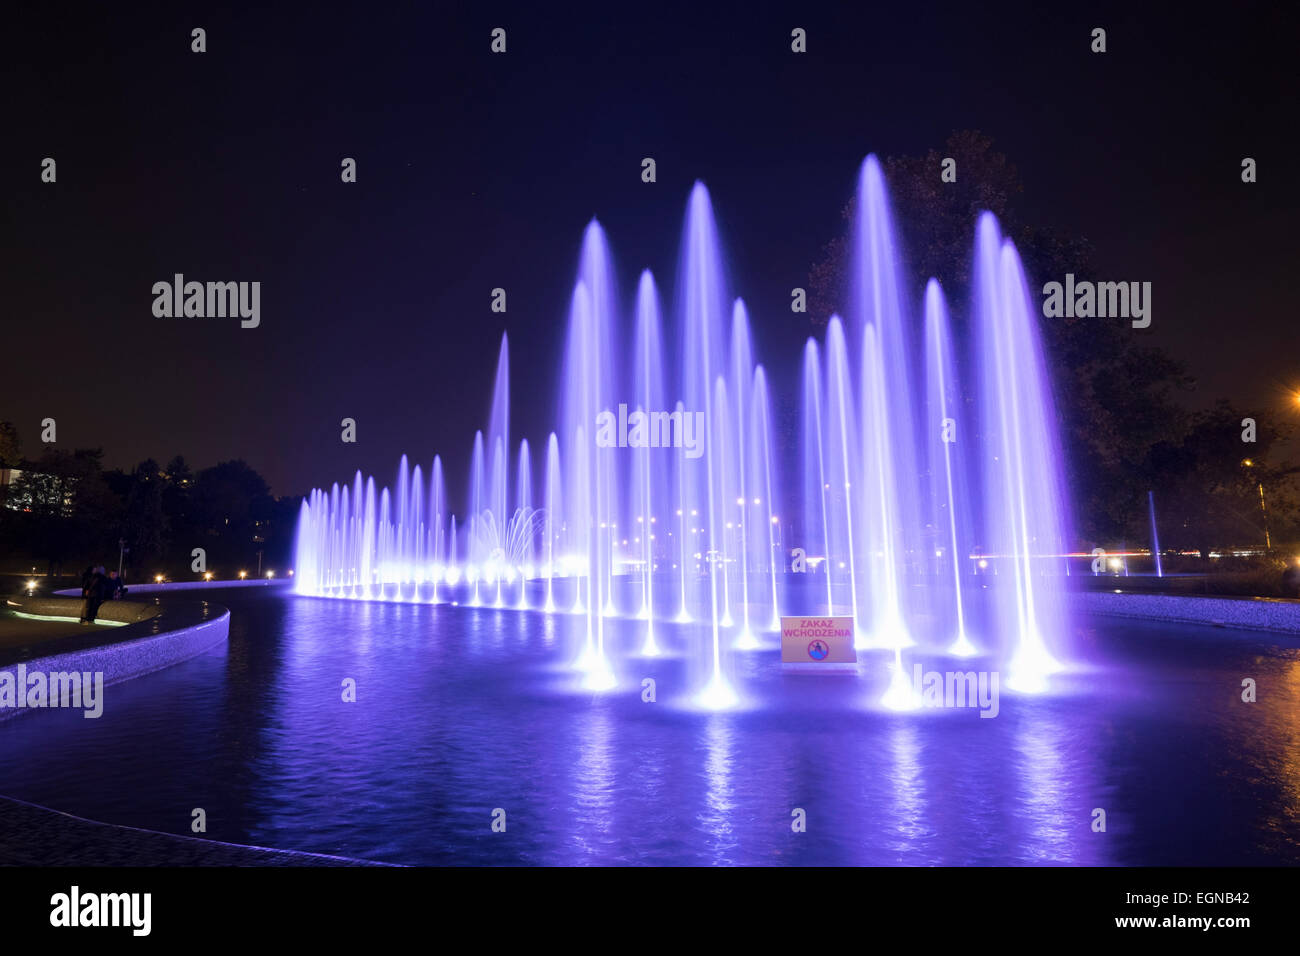 Night images of the Multimedia Fountain Park very close to Warsaw's Old Town by the Wisla River Stock Photo